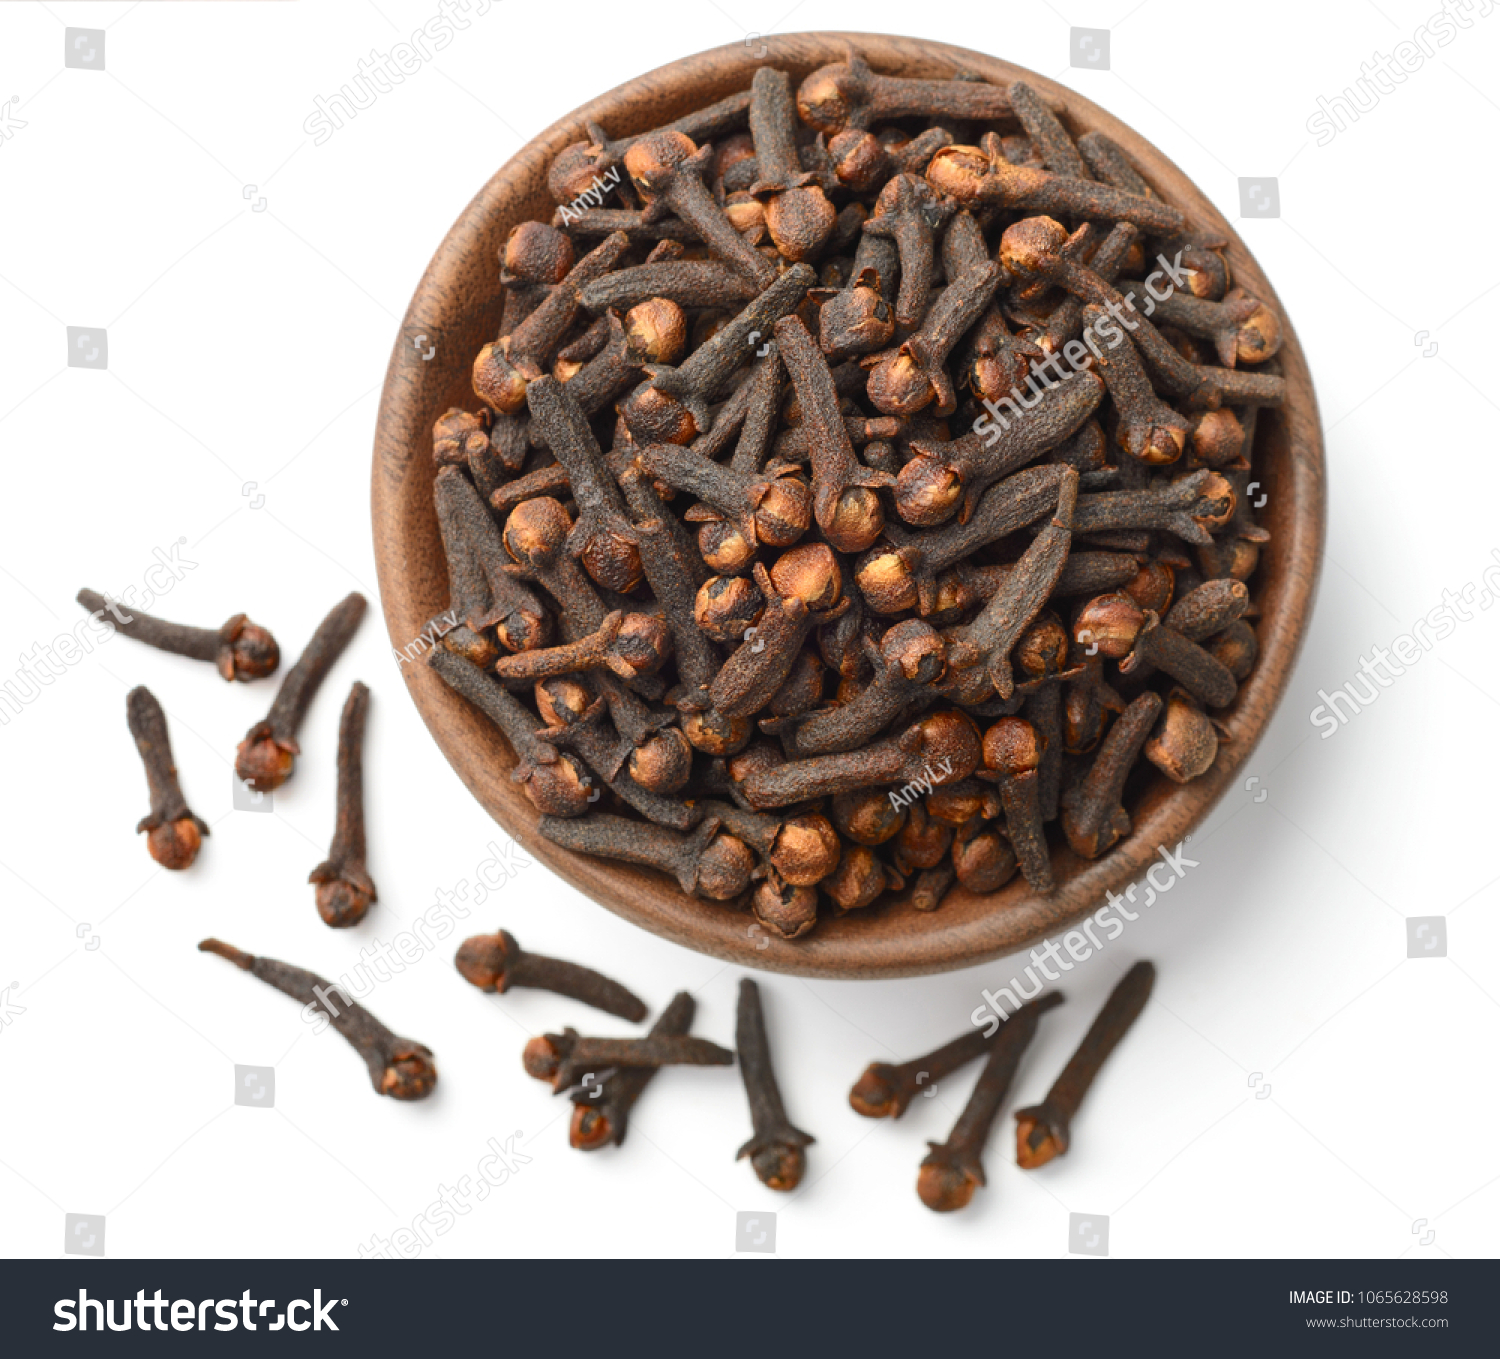 dried herb, dried cloves isolated on white background #1065628598